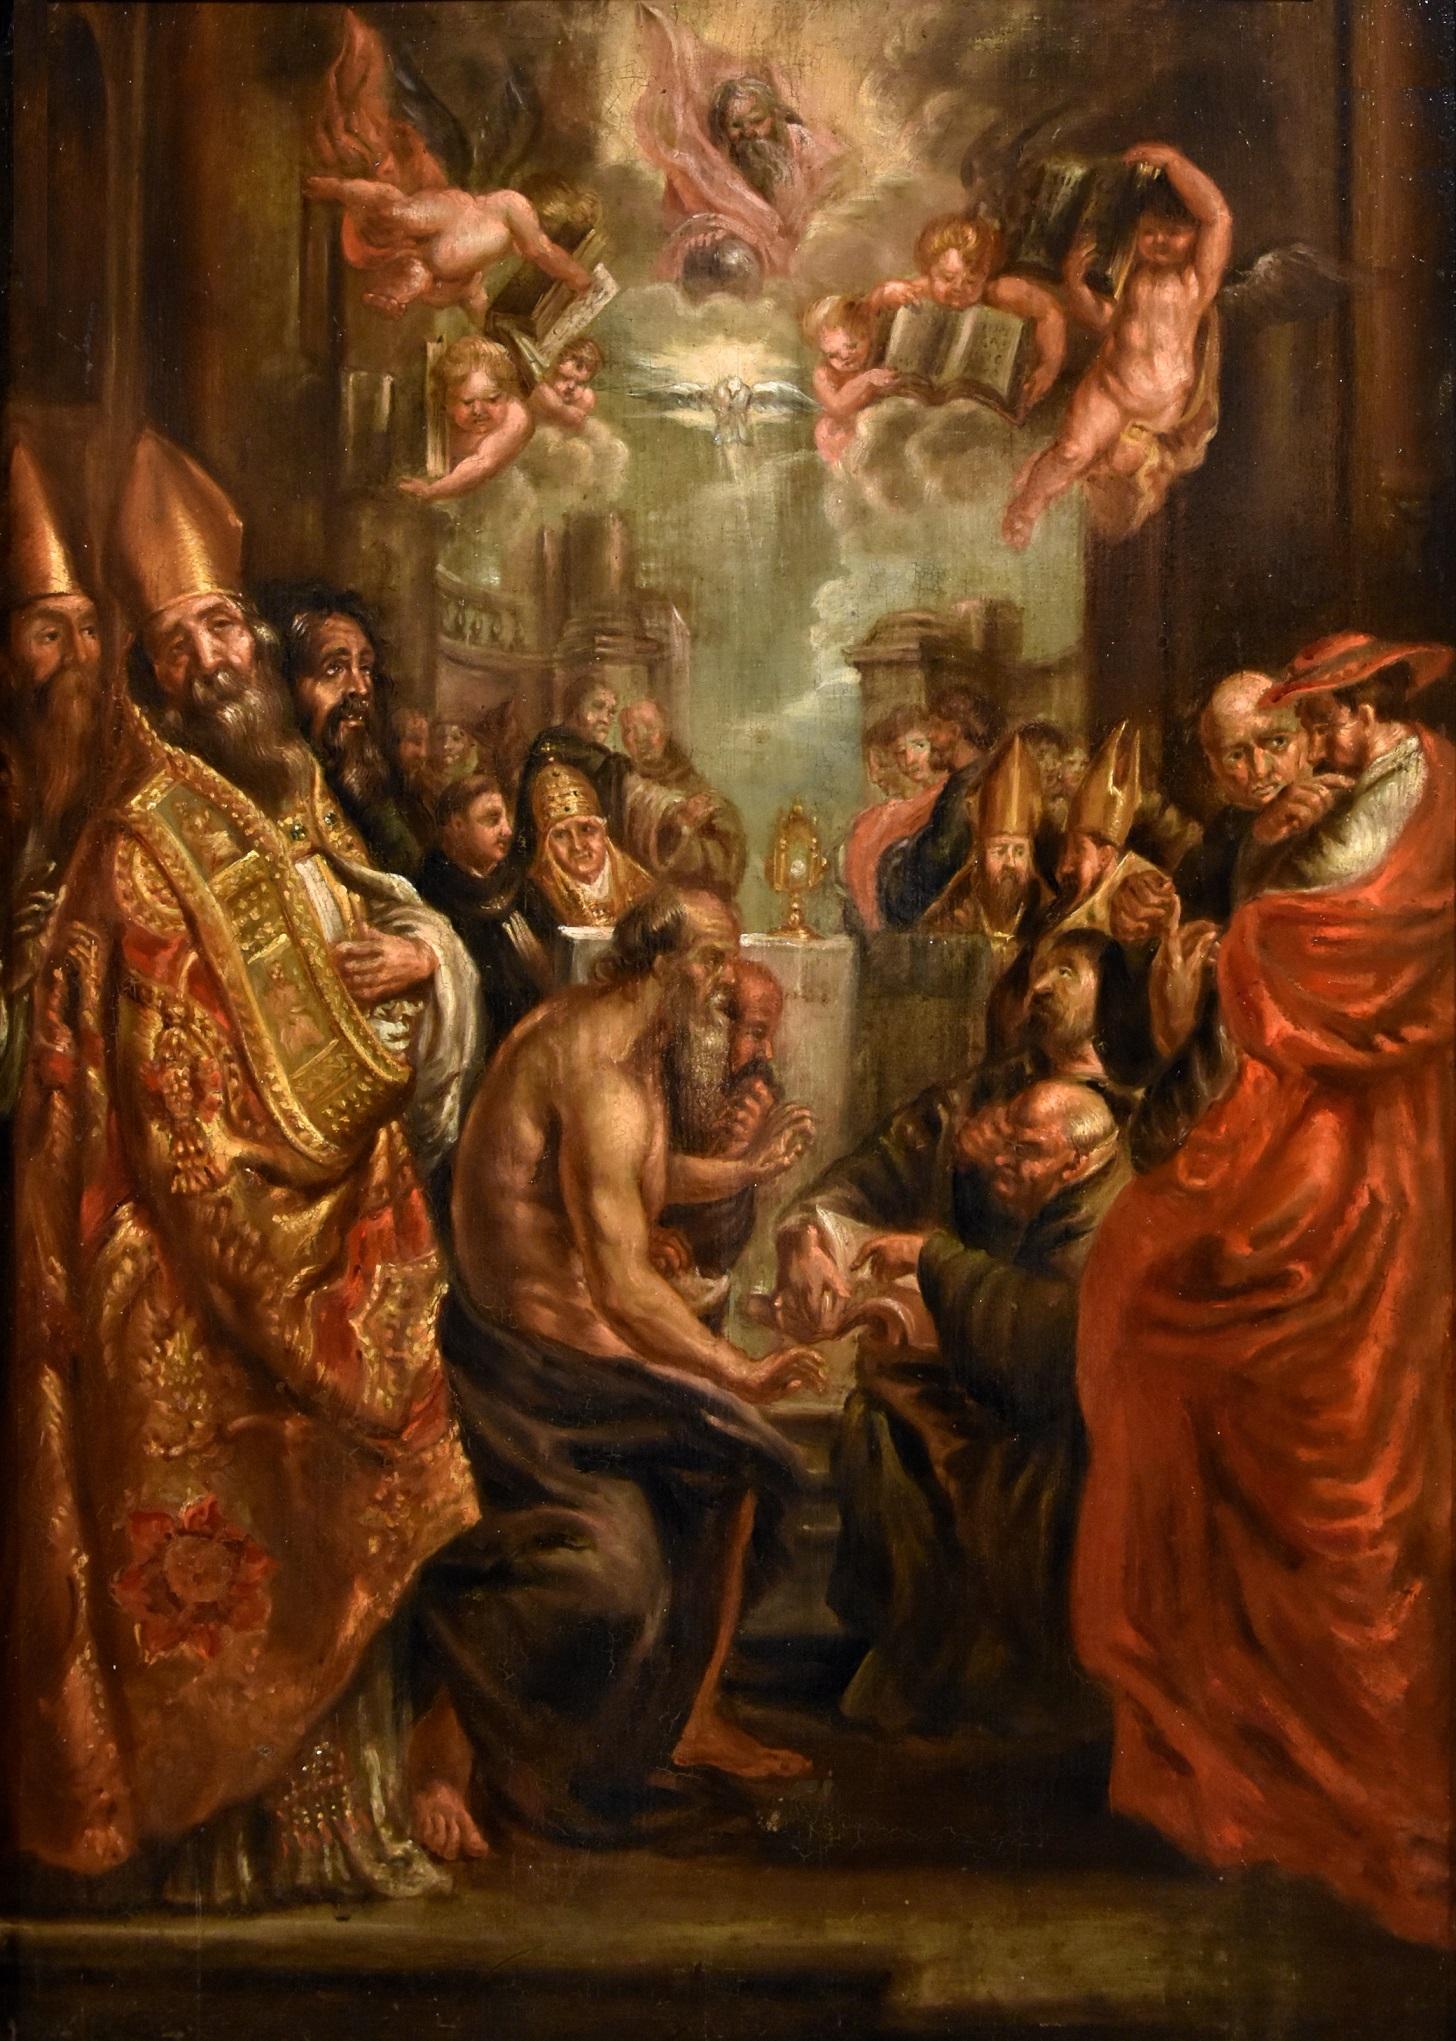 Dispute On The Eucharist Rubens Paint Old master Oil on table 17th Century Italy - Painting by Peter Paul Rubens (Siegen 1577 - Antwerp 1640)